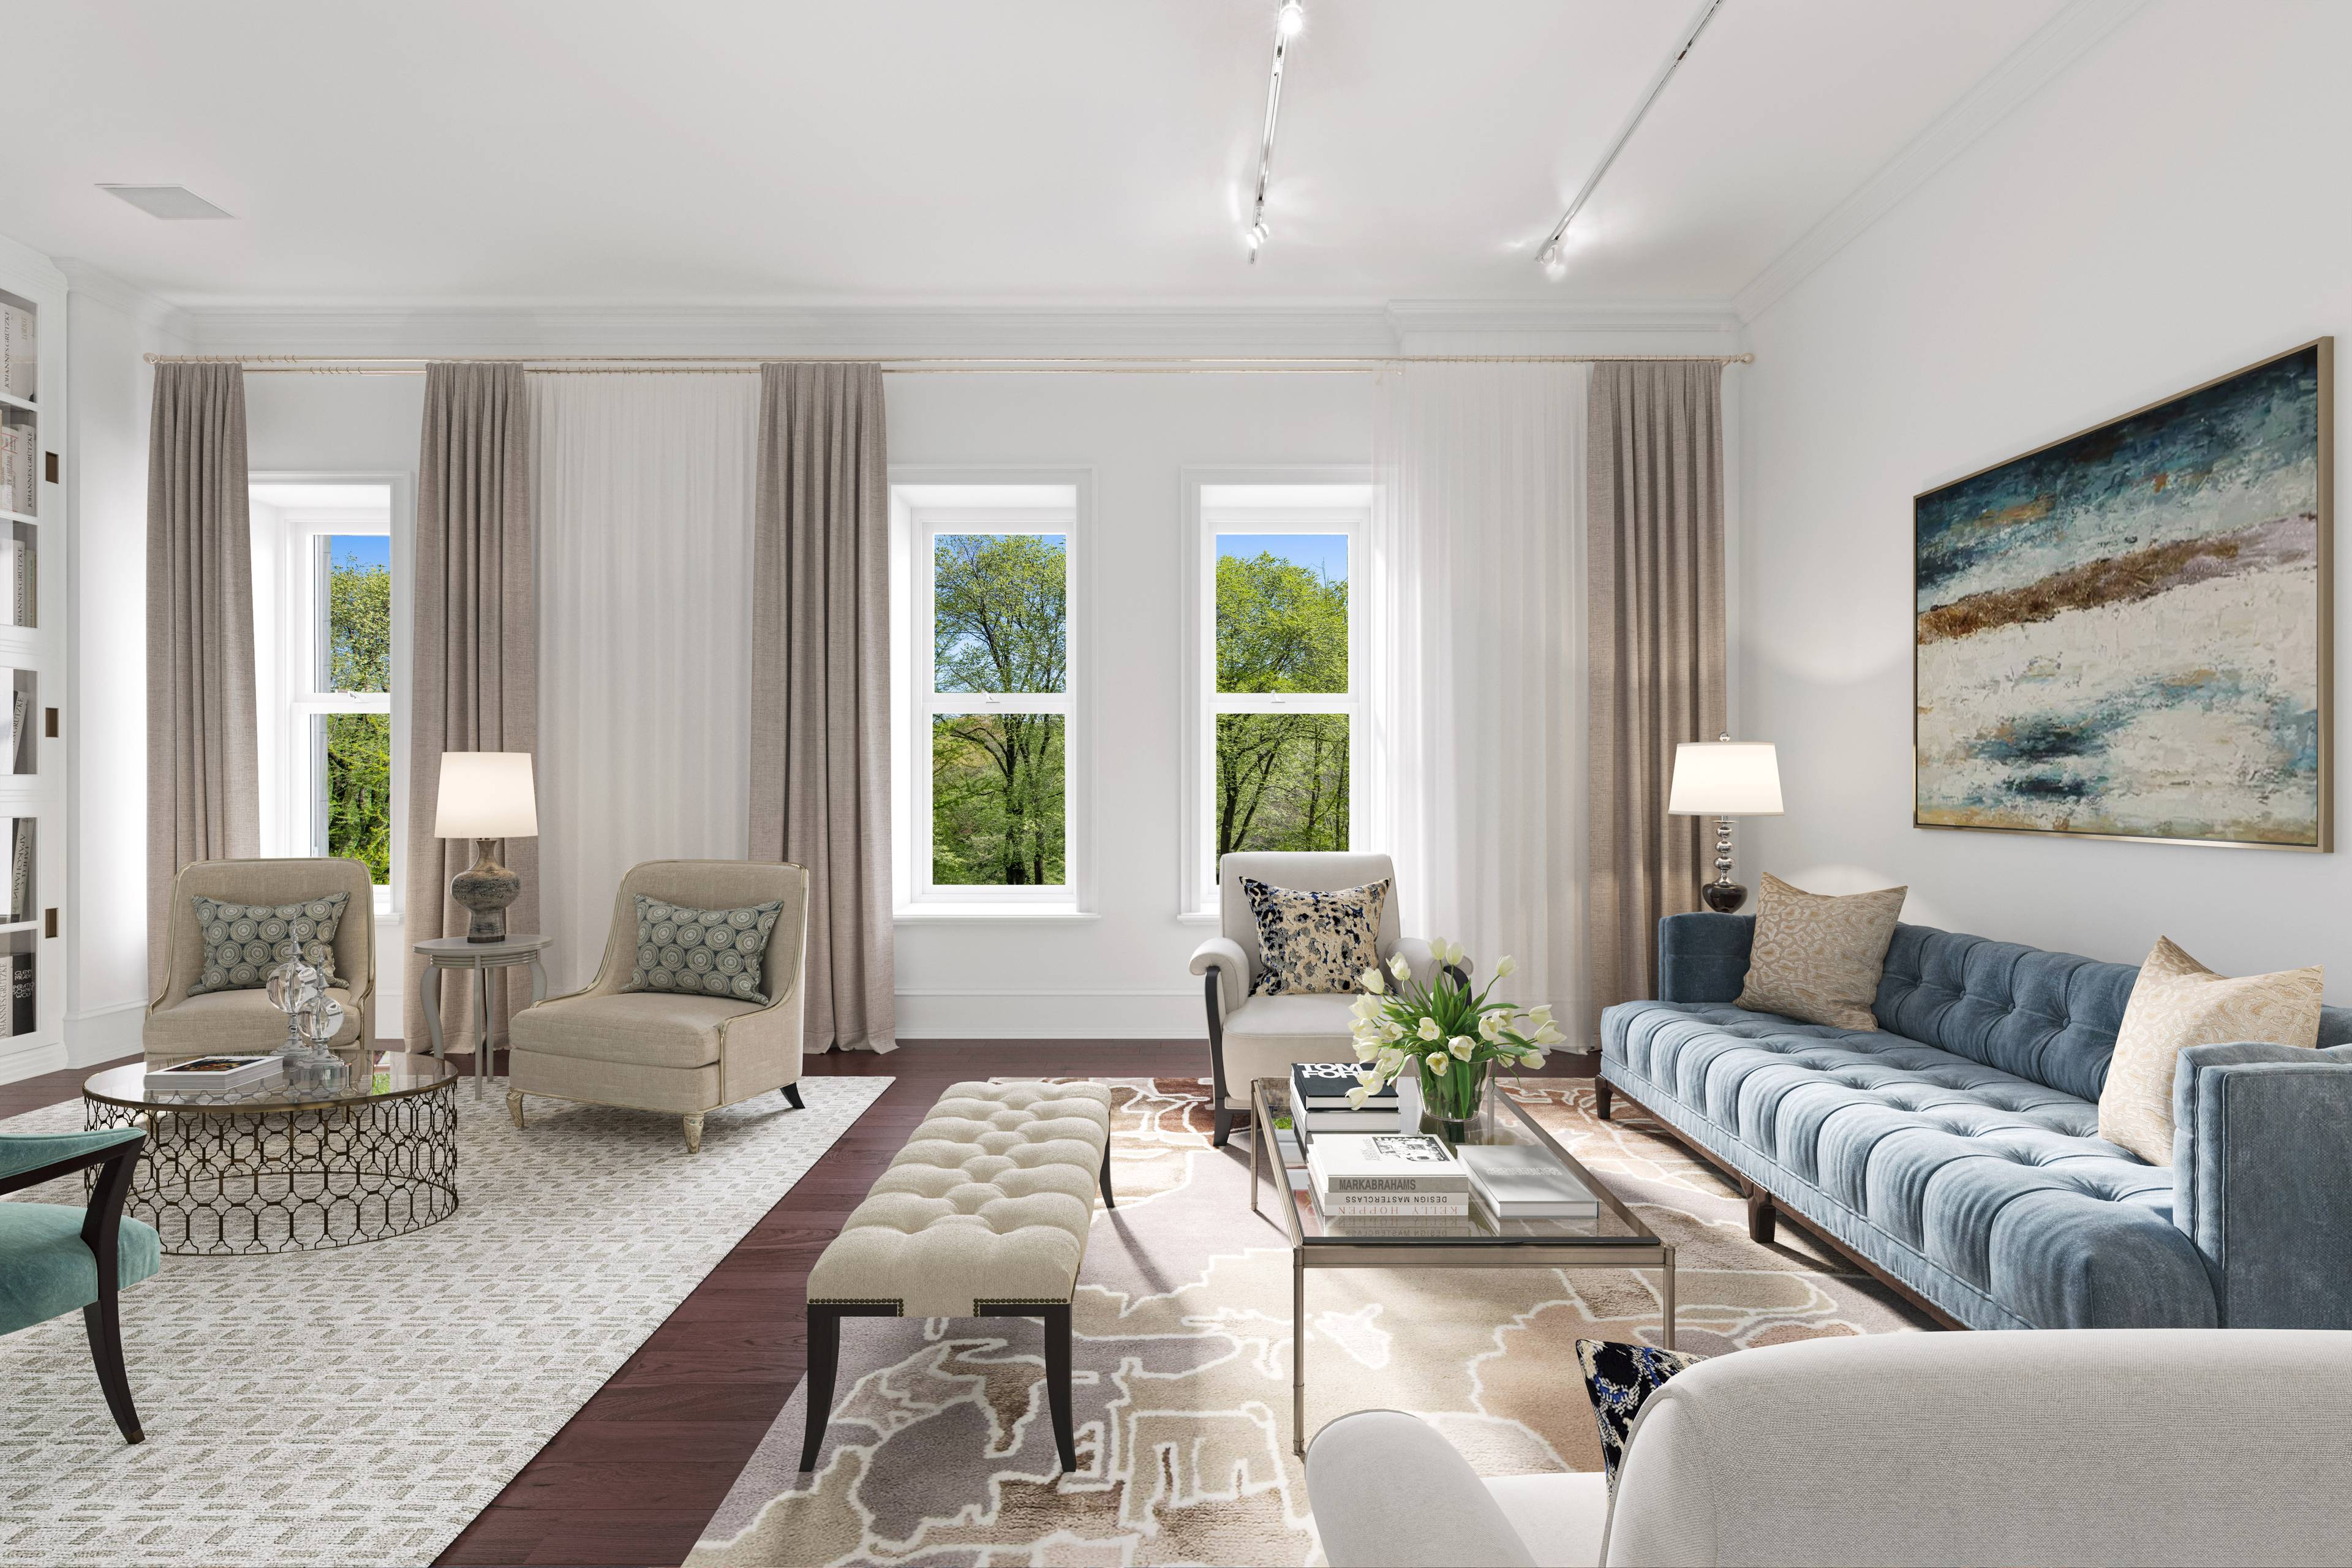 The exquisite Residence 405 spans over 70 feet with frontage directly on Central Park and enormous 13FT ceilings in the world renowned Plaza Private Residences.